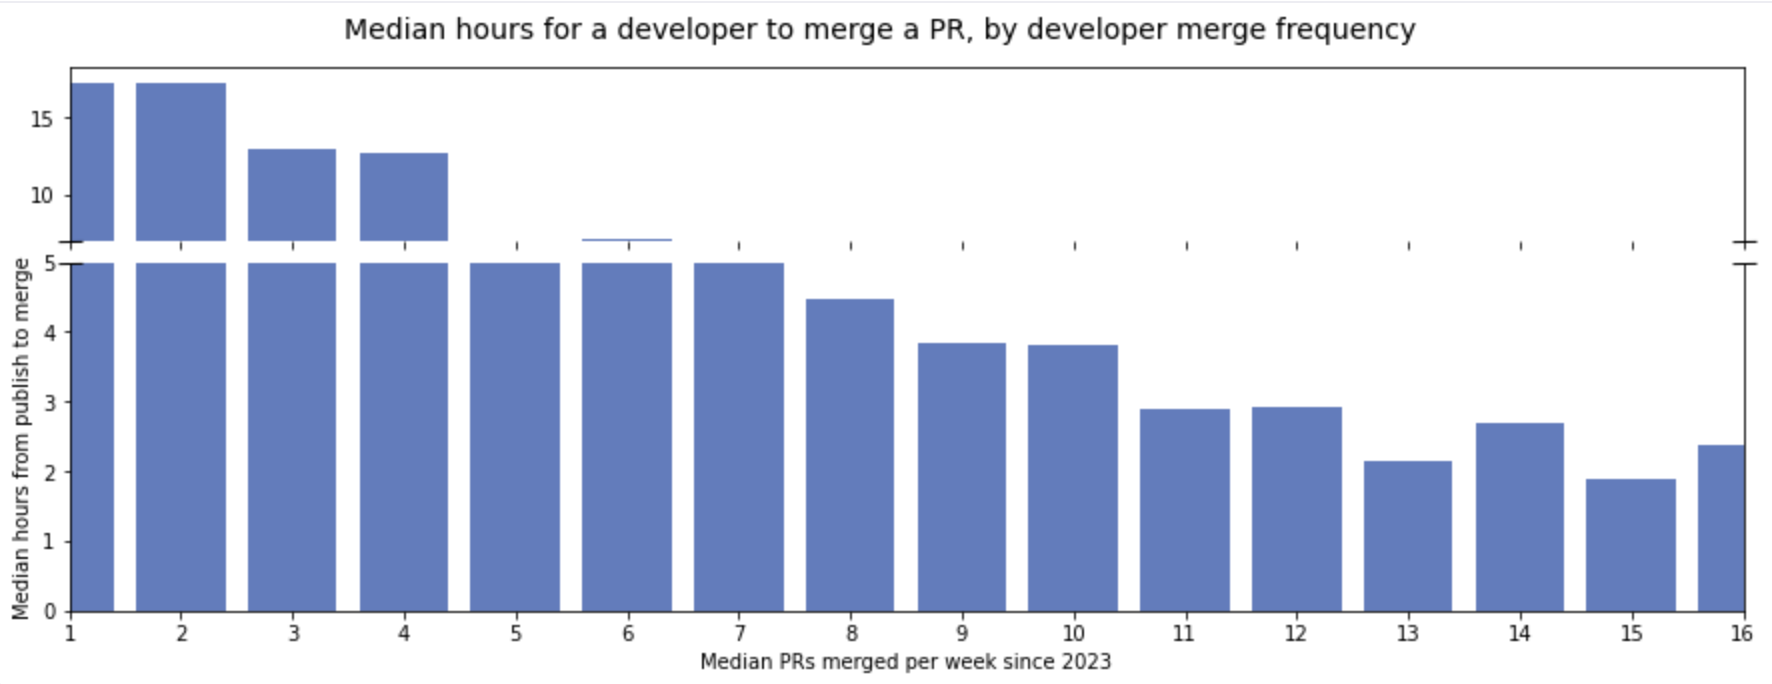 Median hours for dev to merge by frequency